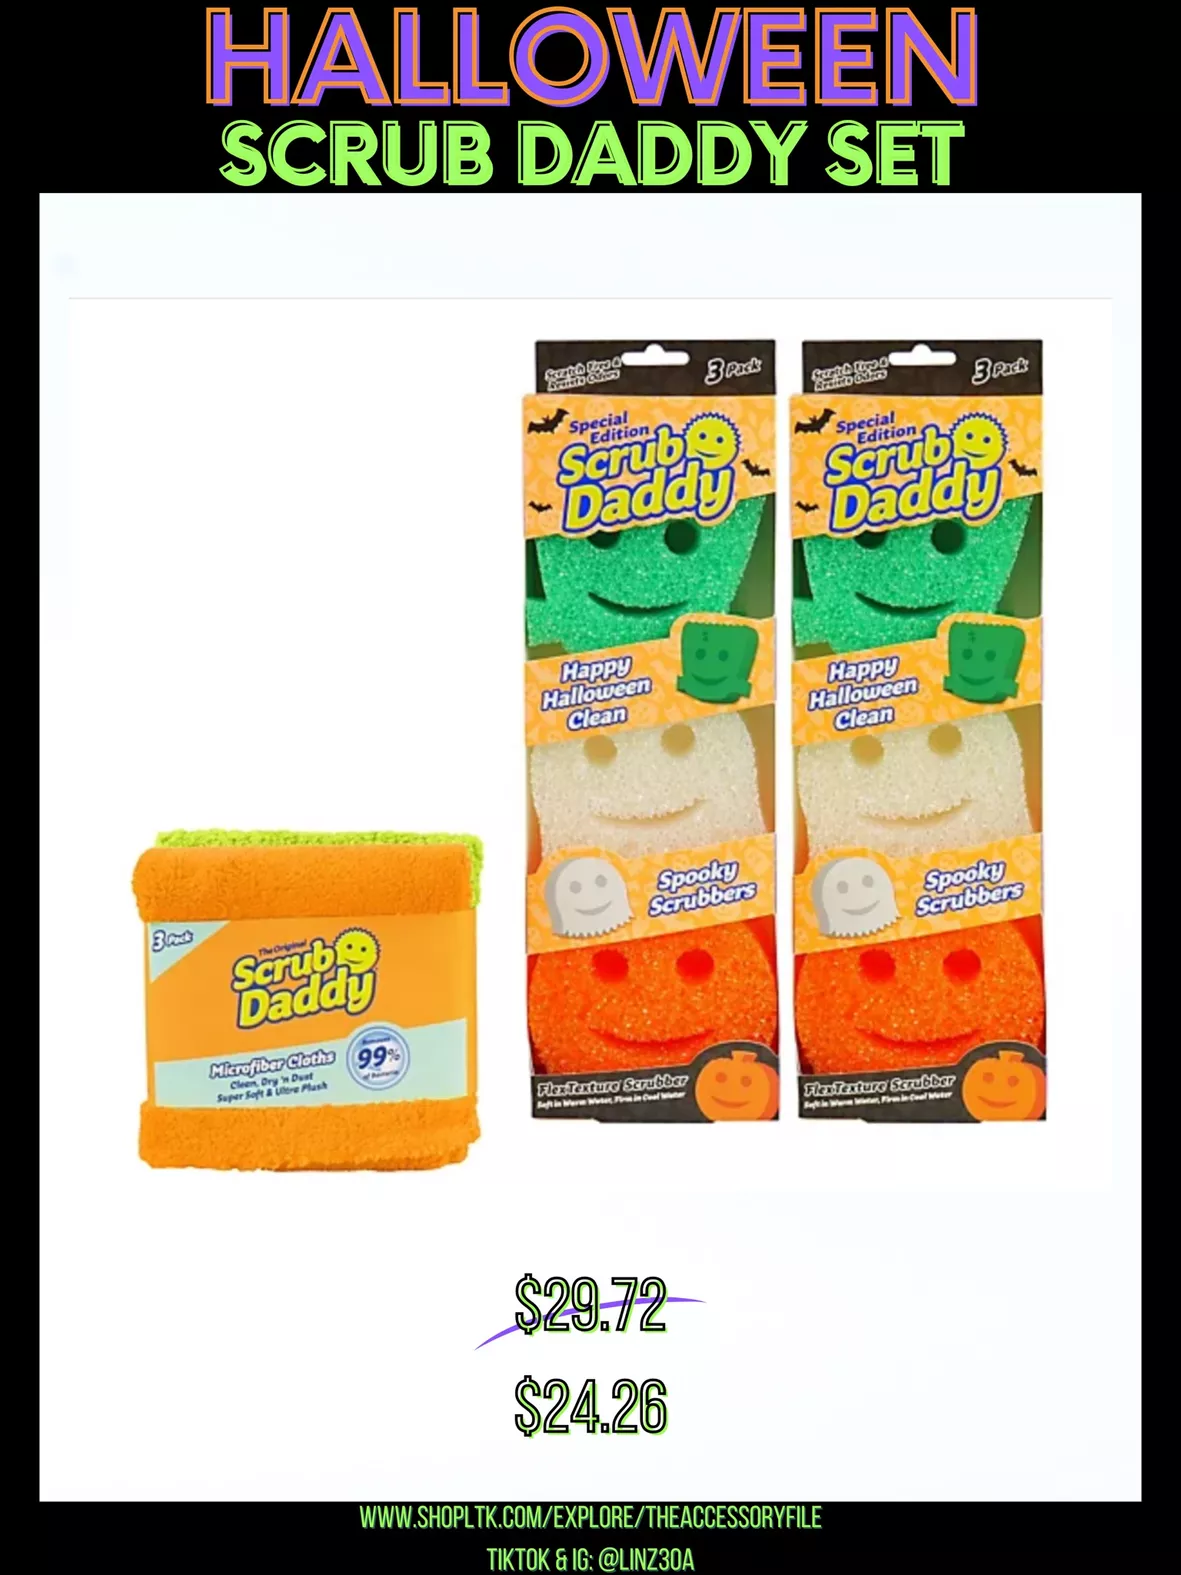 Scrub Daddy's Halloween Sponges Will Lead to Spooky Cleaning All October  Long